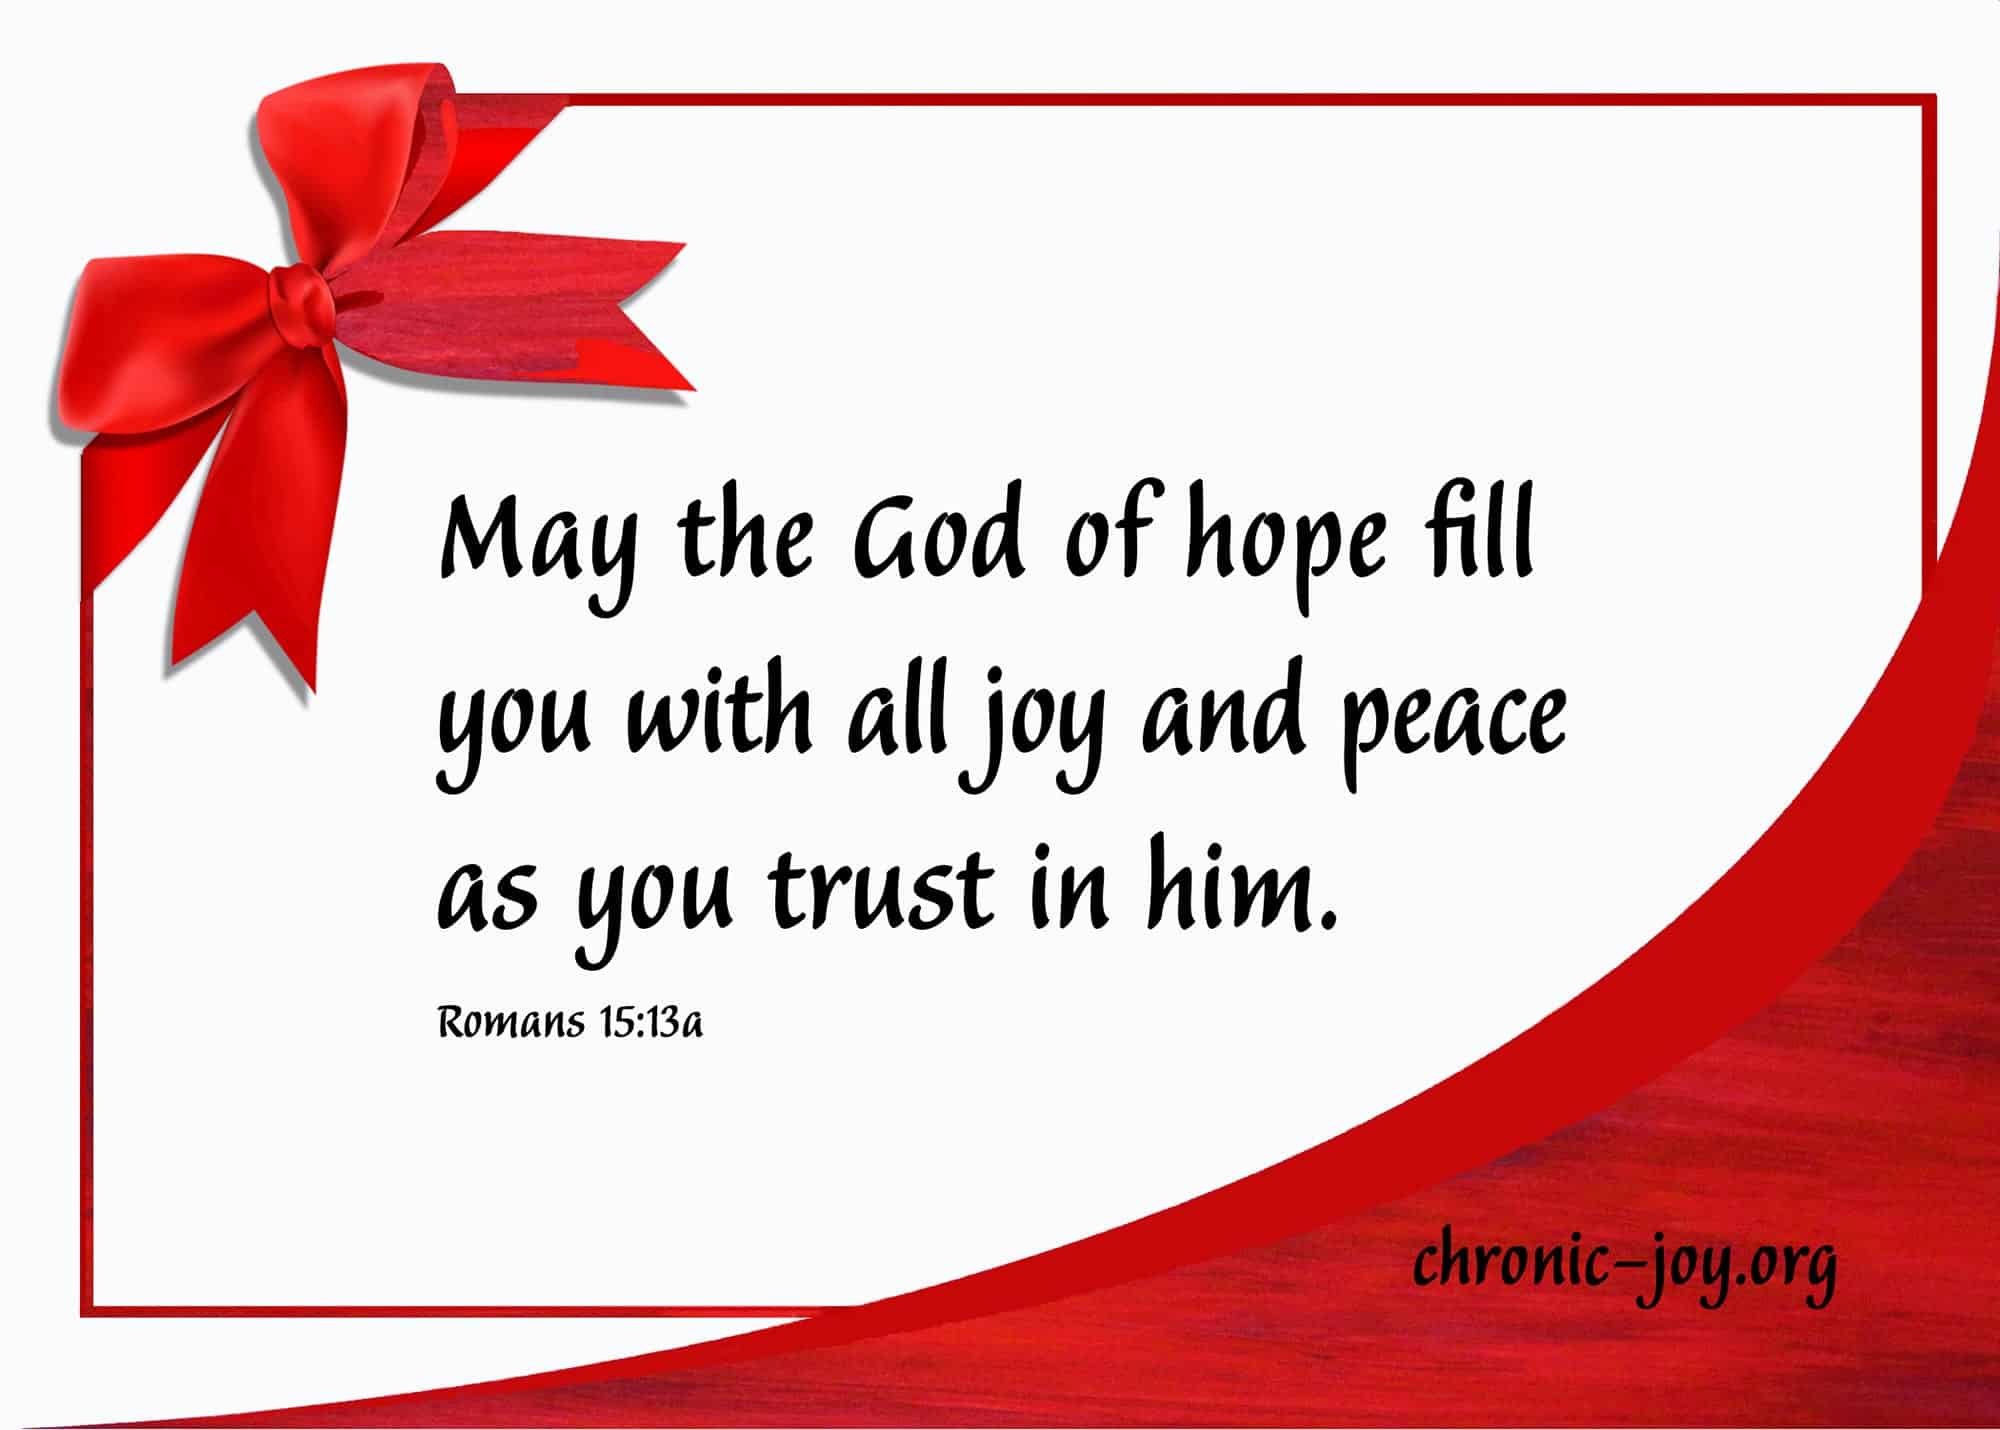 May the God of hope fill you with all joy and peace as you trust in him.